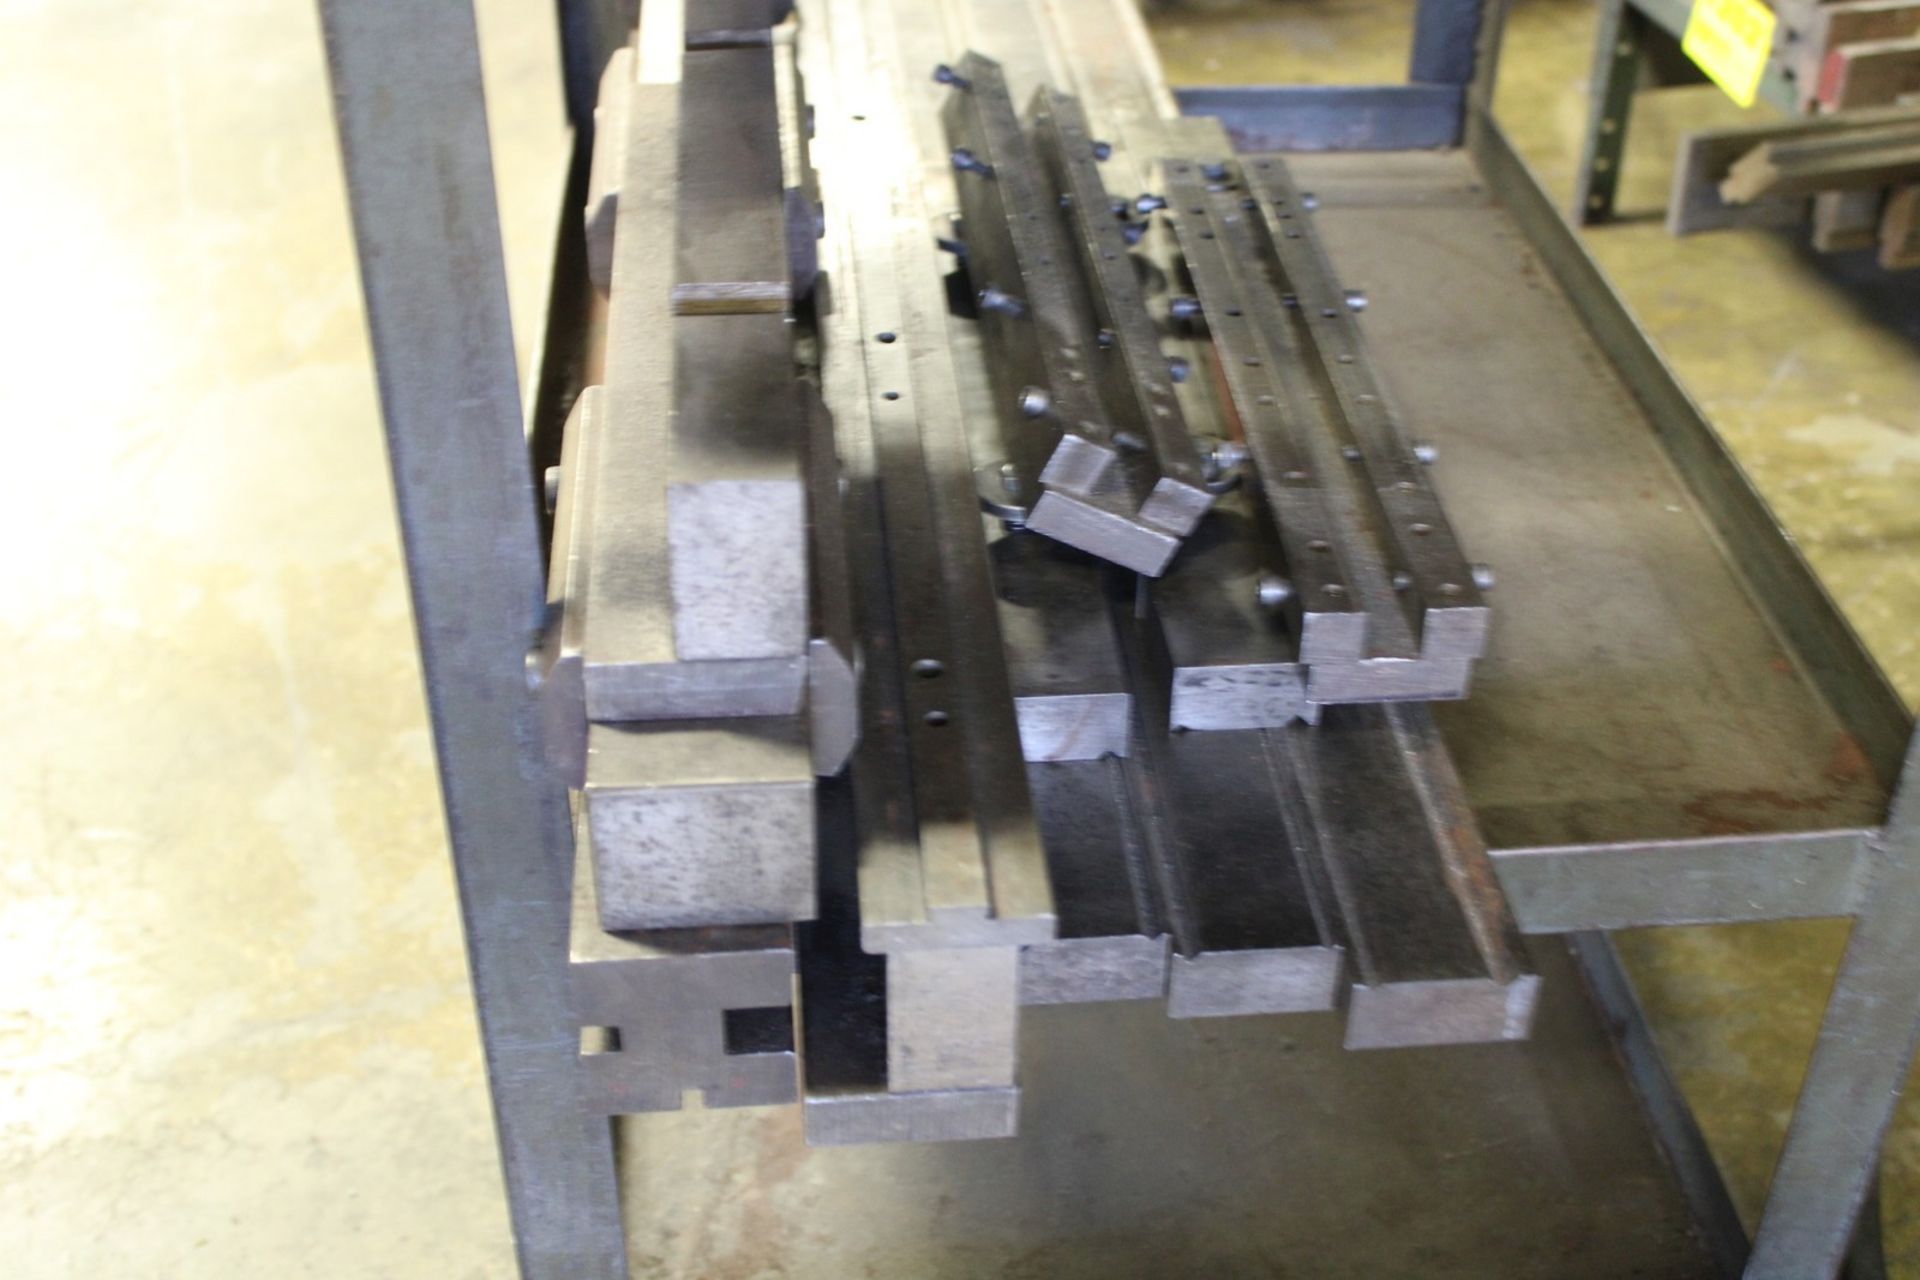 PORTABLE SHOP CART WITH ASSORTED PRESS BRAKE DIES - Image 2 of 3